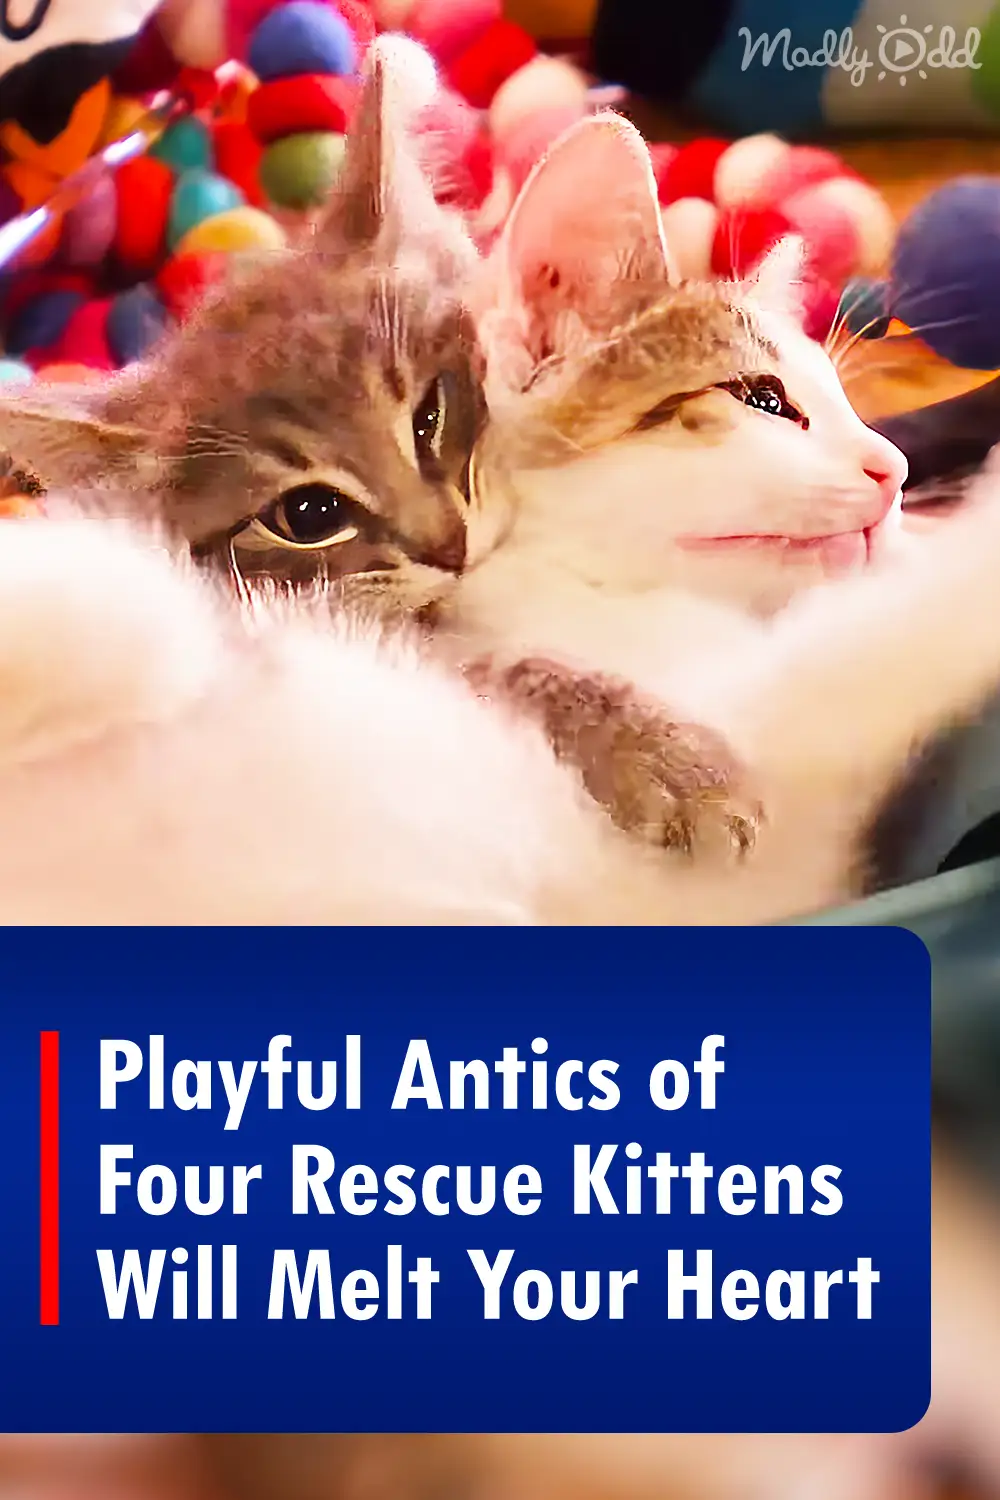 Playful Antics of Four Rescue Kittens Will Melt Your Heart